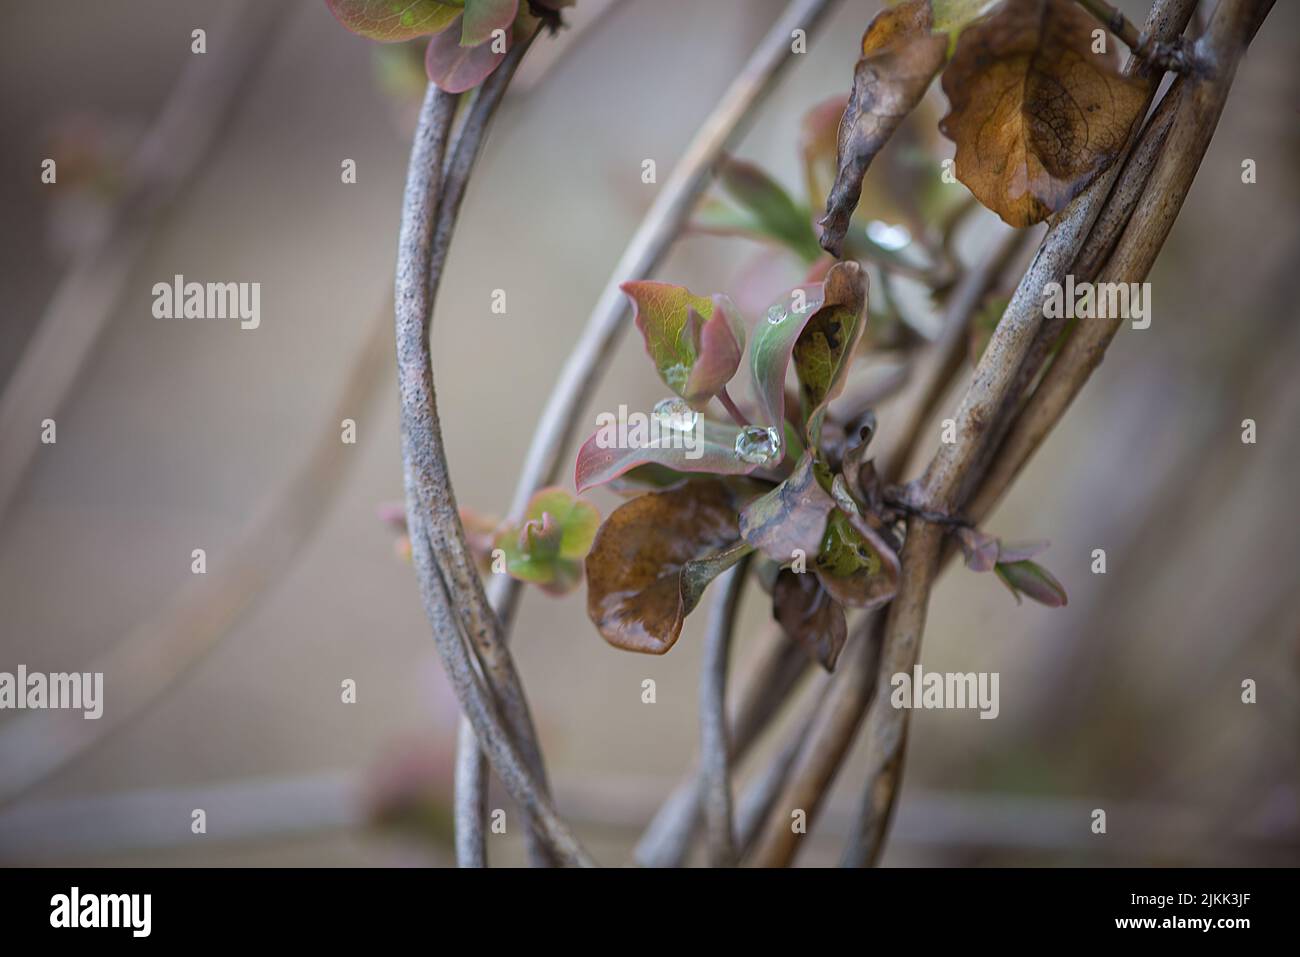 A closeup of rain drops on branches with leaves Stock Photo